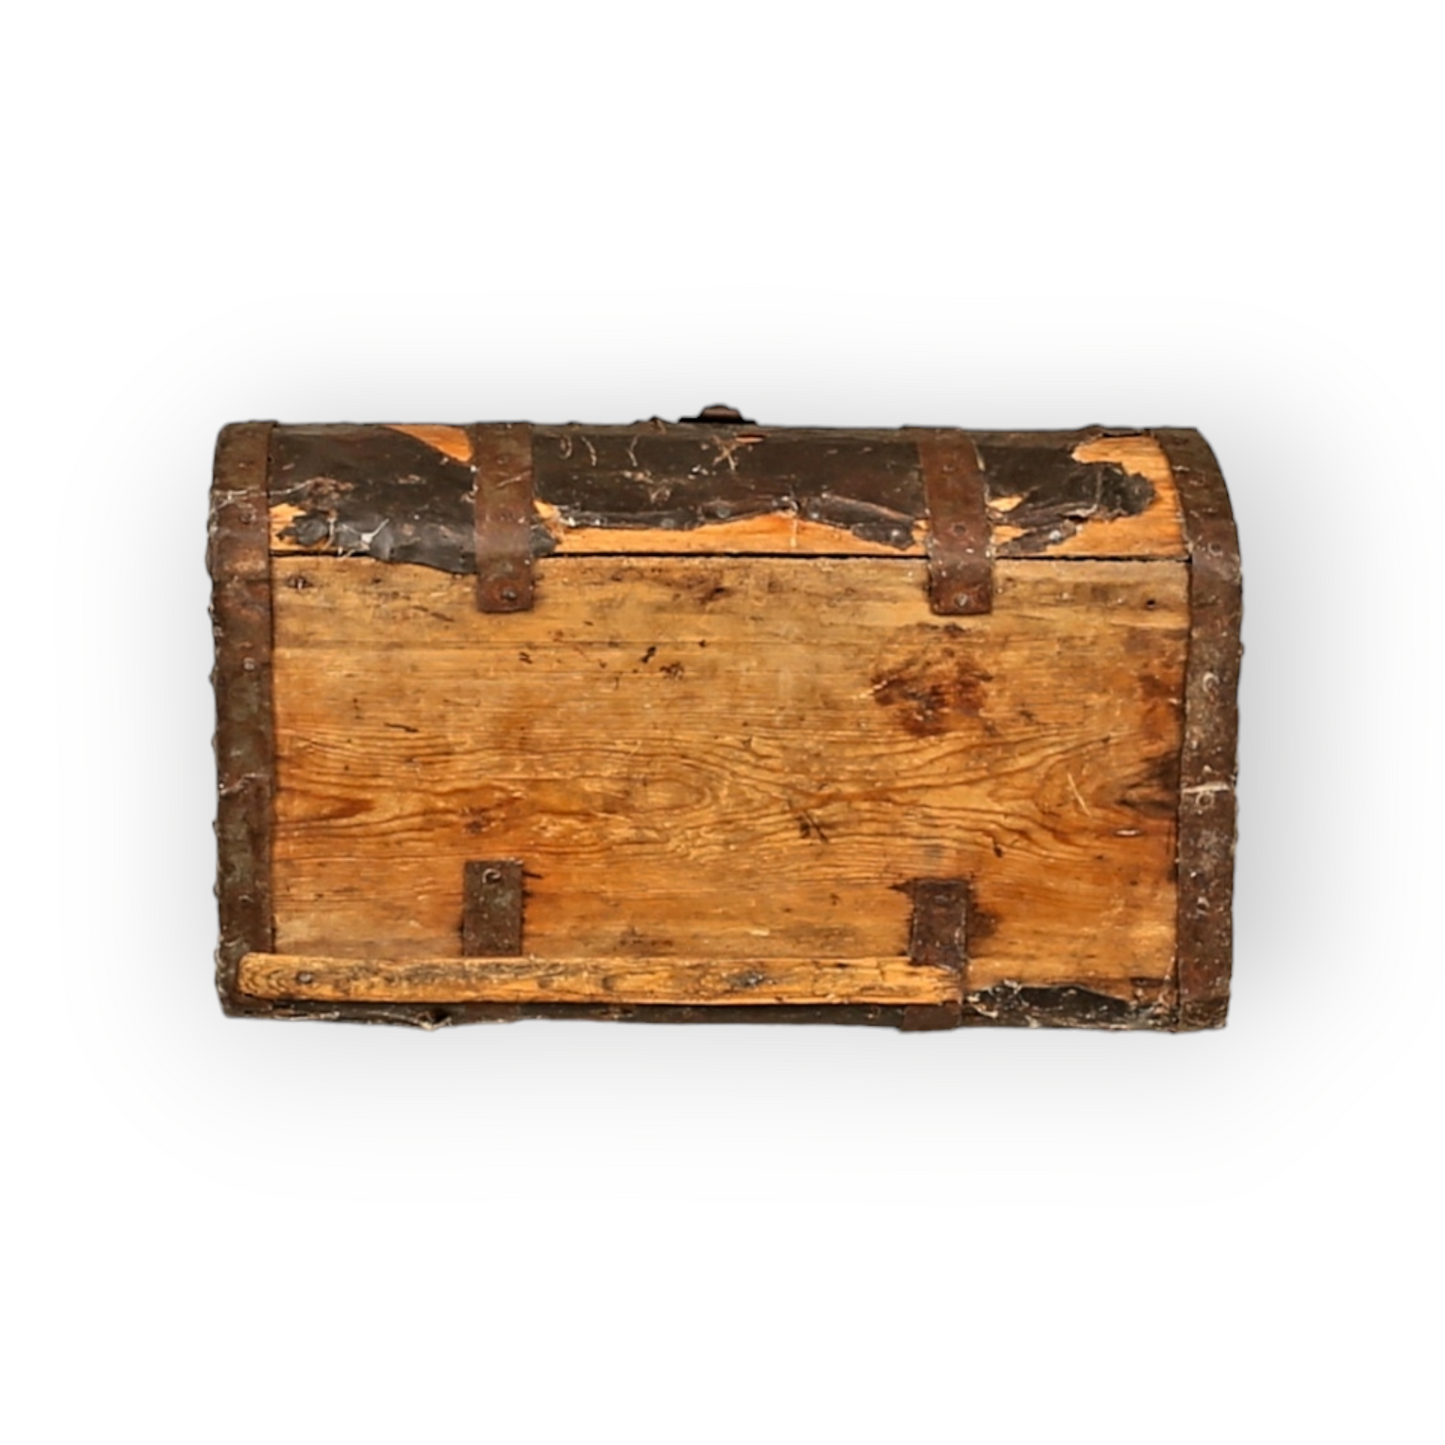 Early 17thC Scandinavian Antique Iron and Leather Bound Table Box of Unusual Form, circa 1600